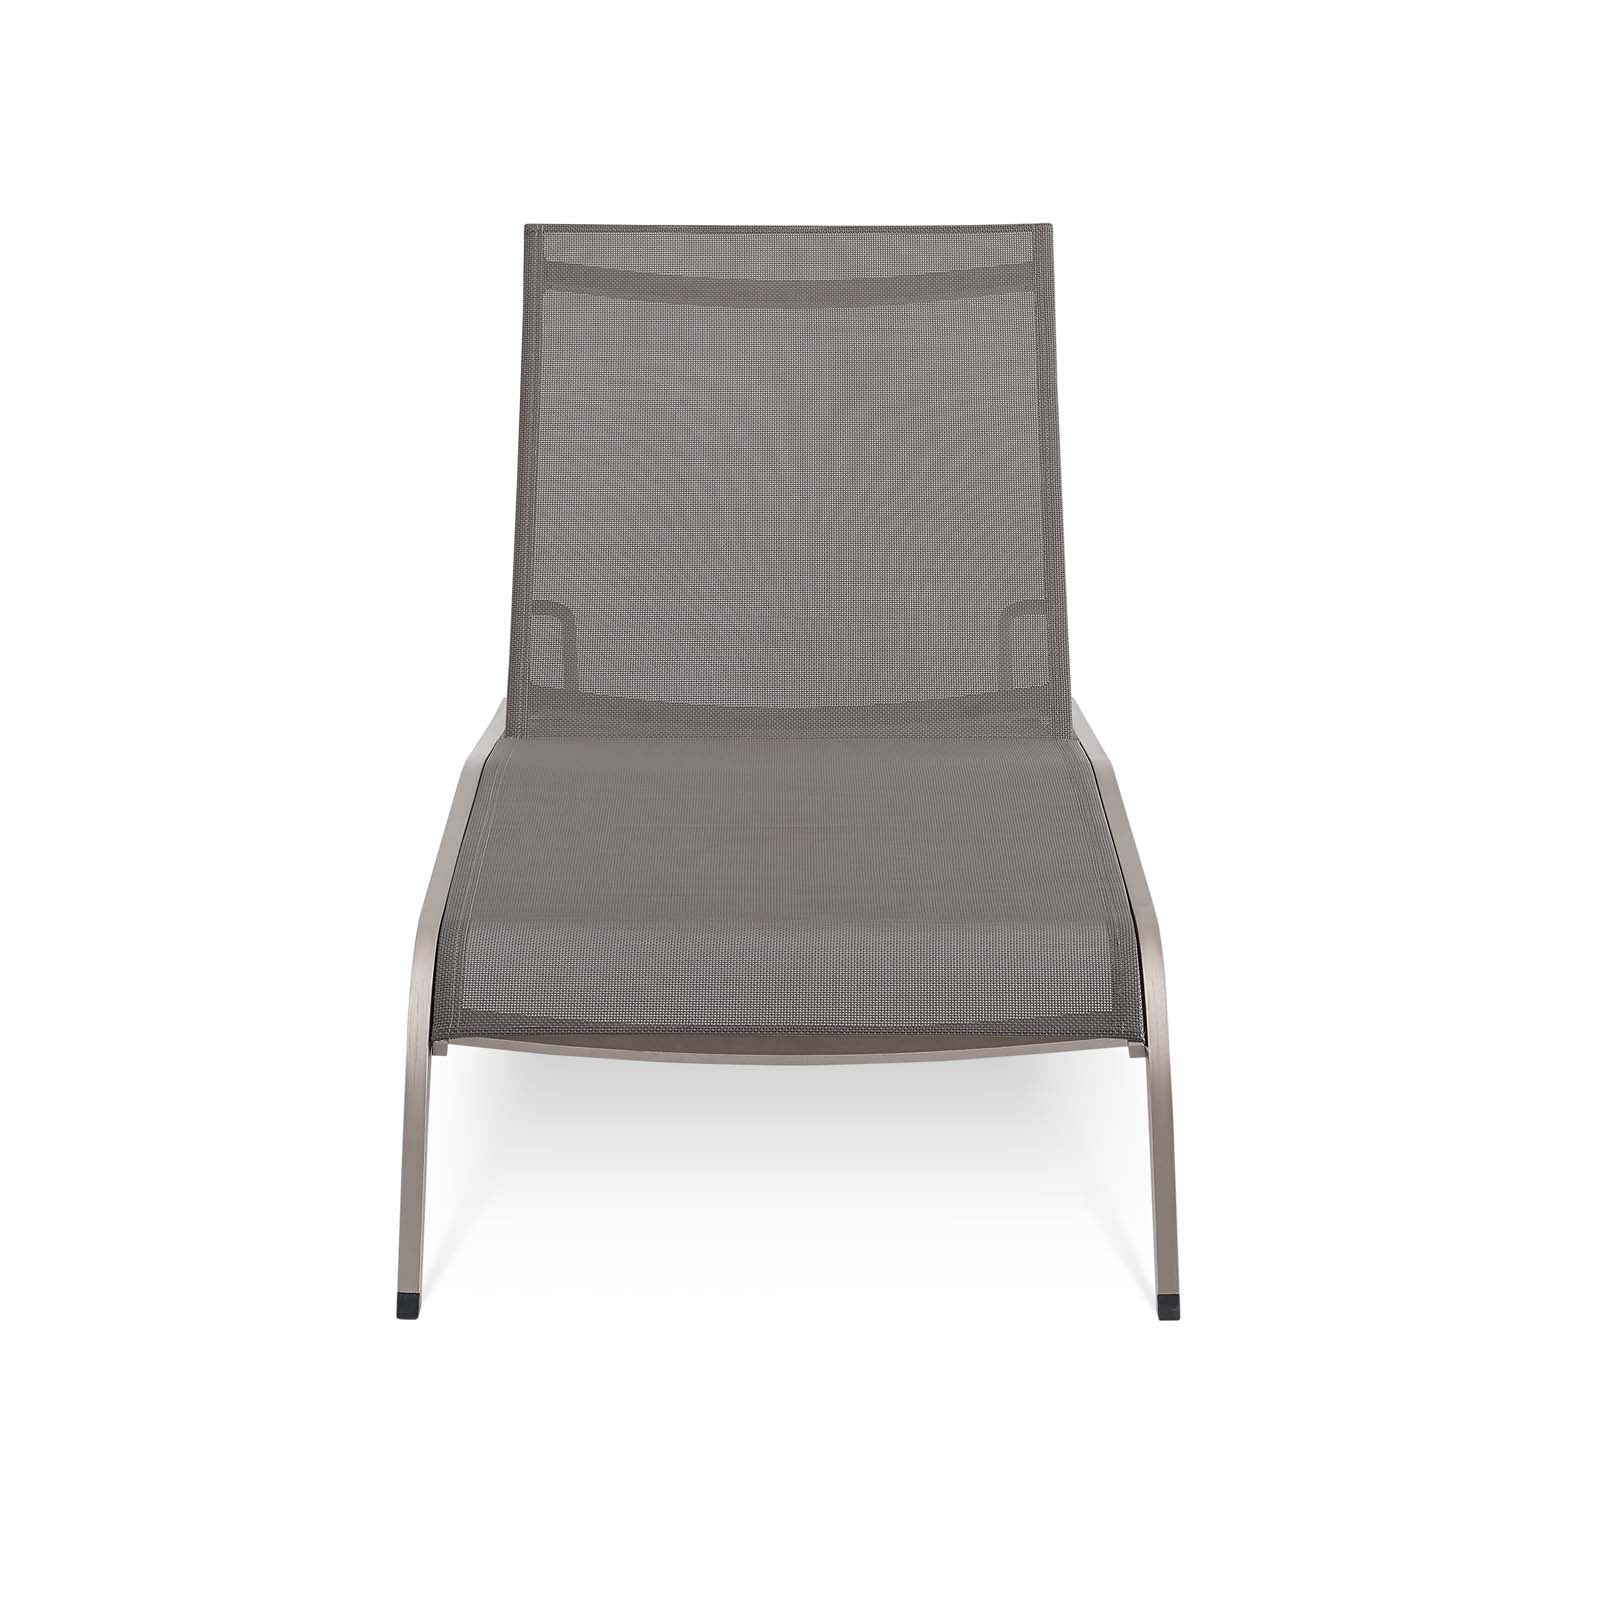 Modway Outdoor Loungers - Savannah Mesh Chaise Outdoor Patio Aluminum Lounge Chair Gray